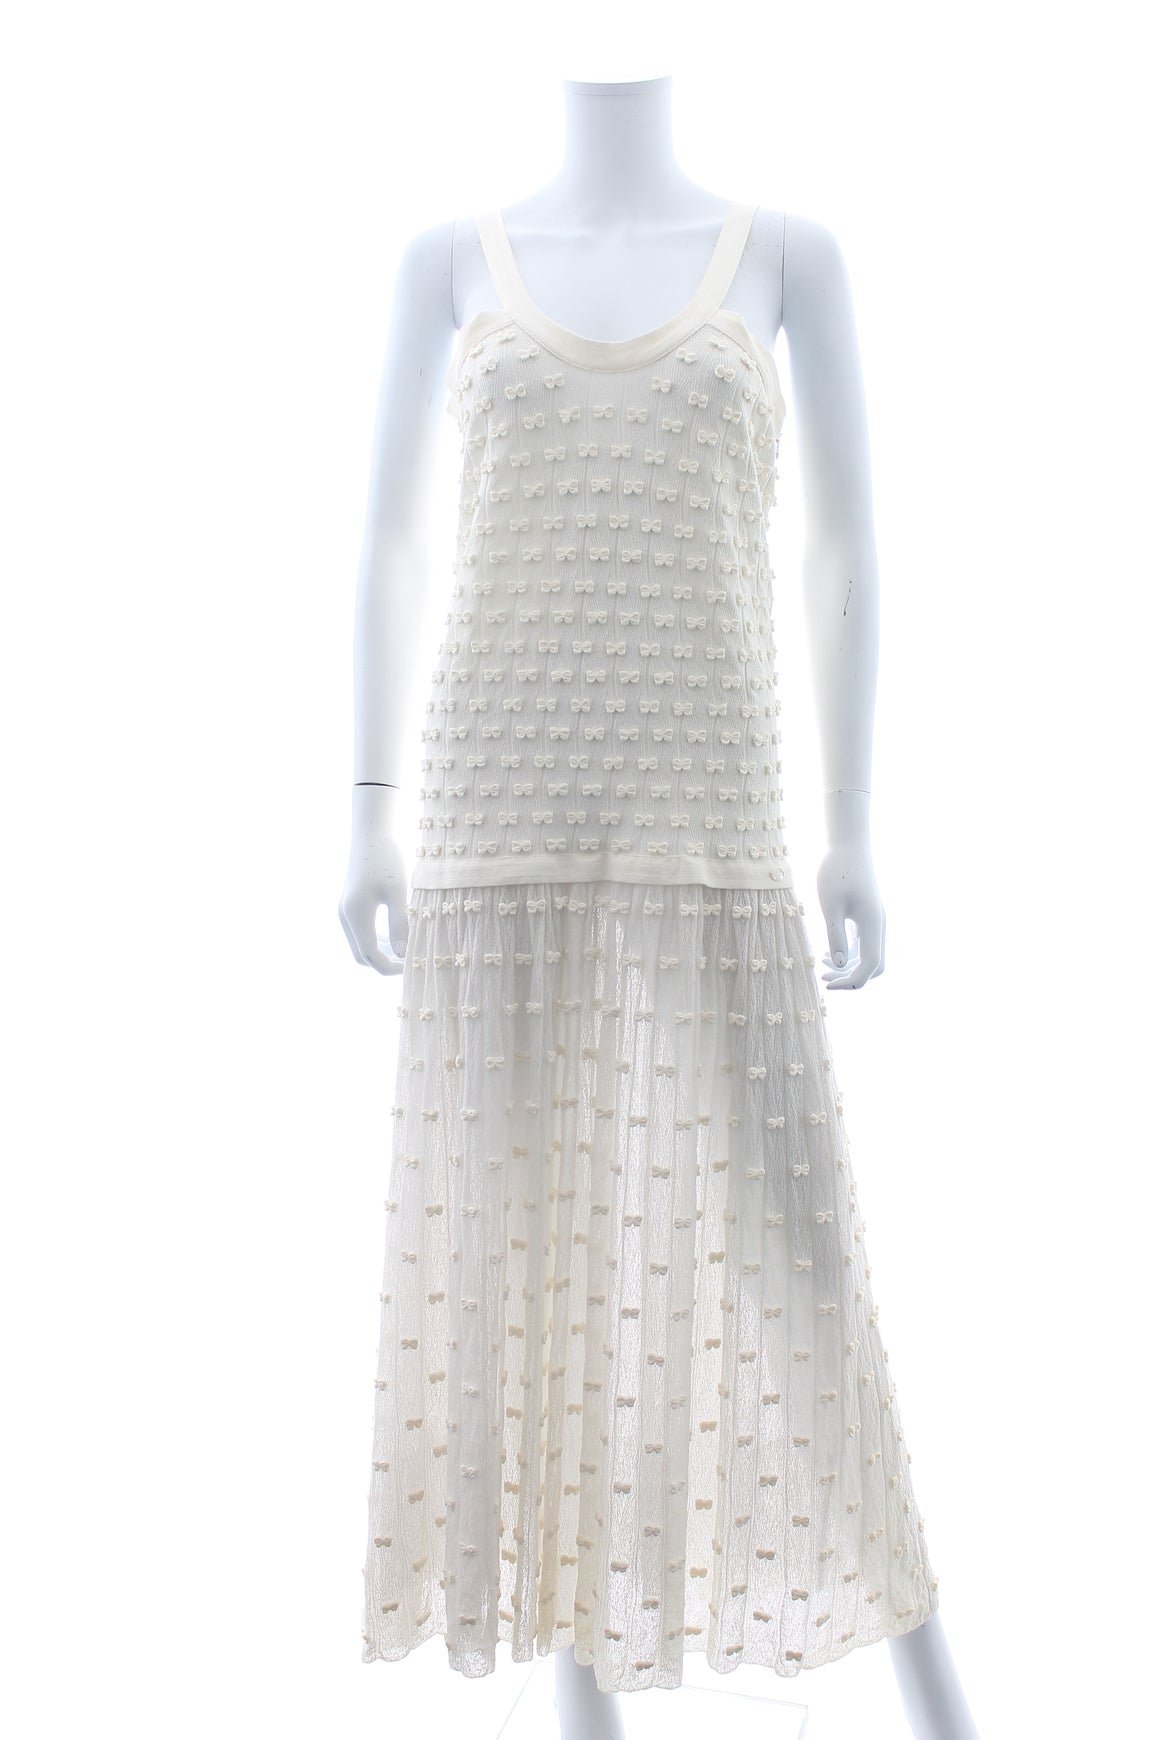 Chanel Bow Embellished Cotton-Blend Sleeveless Dress - Spring 2014 Runway Collection